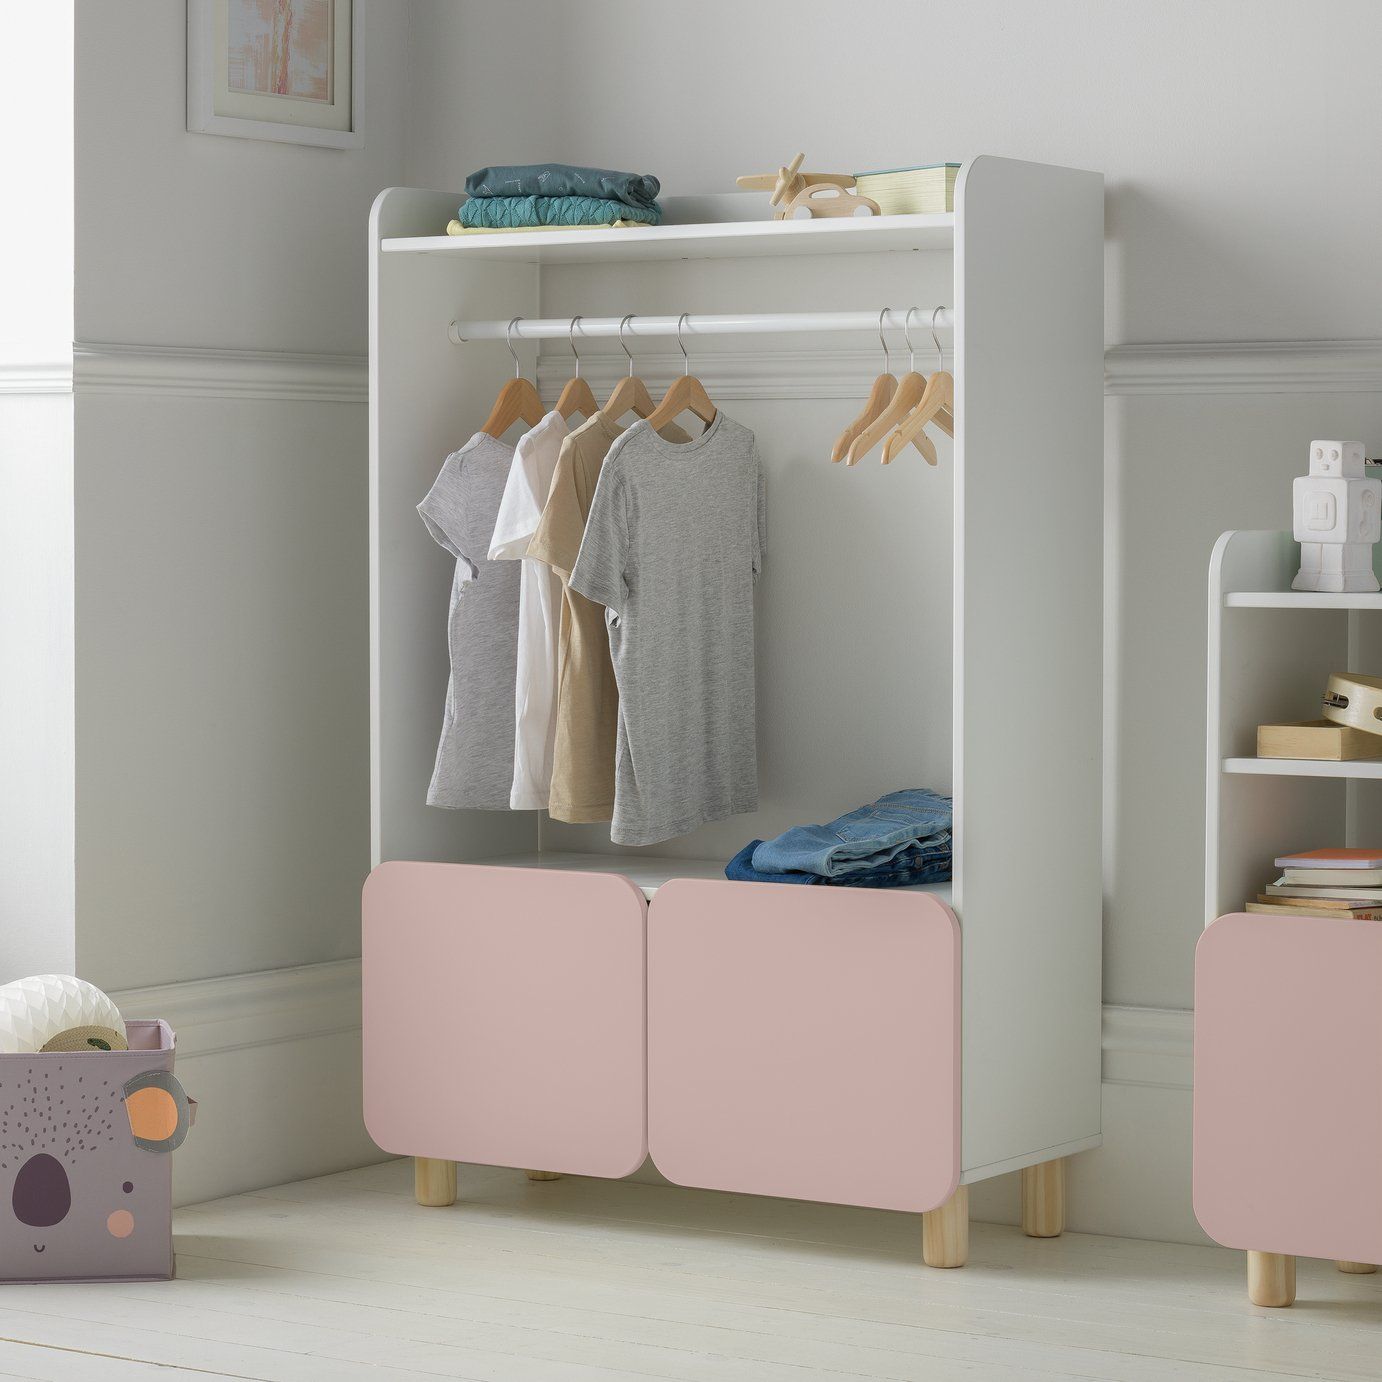 Argos Home Milo Dressing Rail – Pink | Compare Furnishings In Argos Double Rail Wardrobes (View 6 of 15)